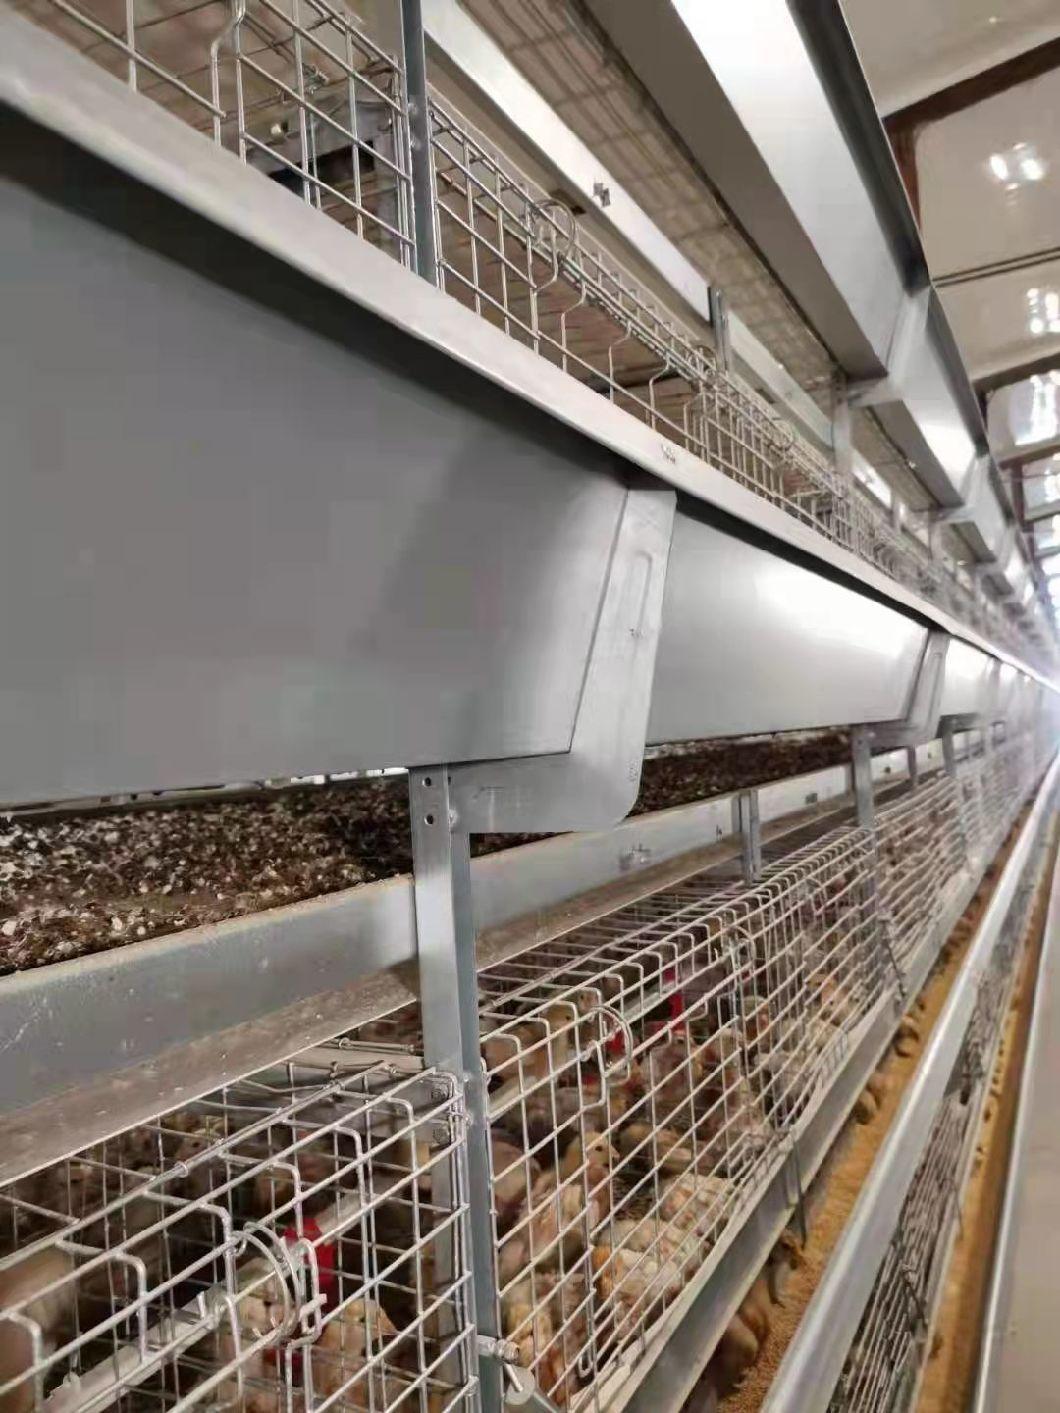 Large Size High Quality Chicken Coop Cage in China